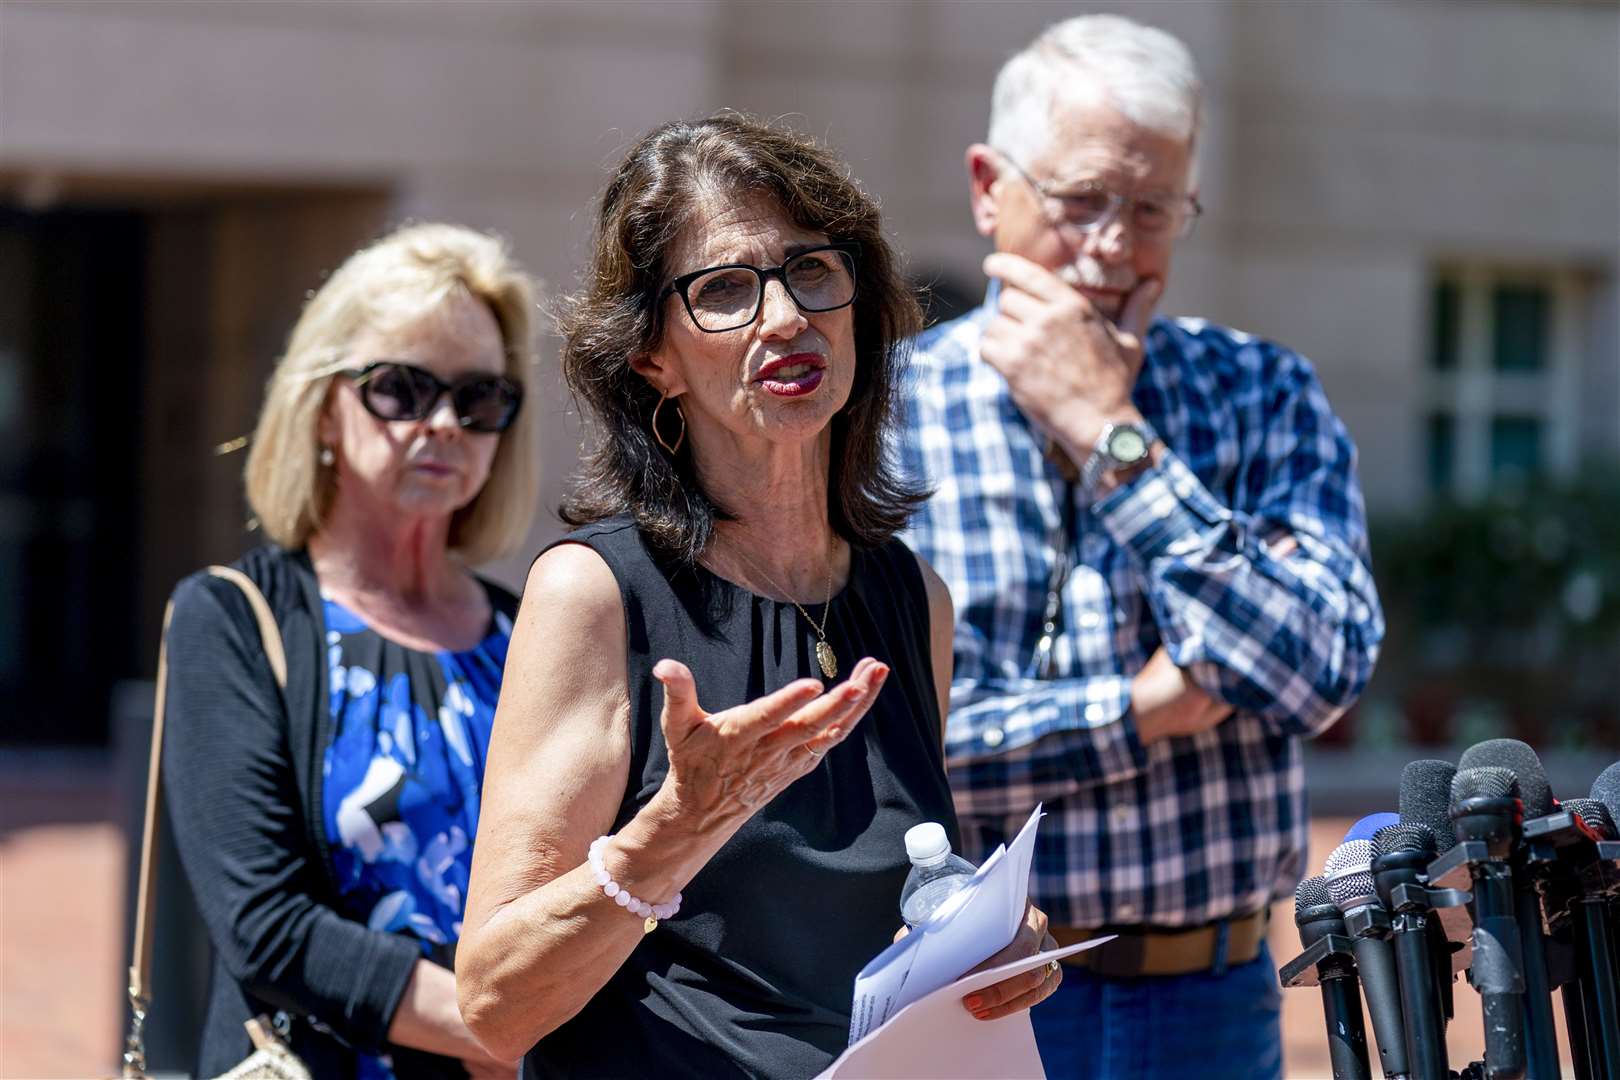 Speaking outside court, the families of Mr Foley and Ms Mueller said they were ‘not shocked’ by Elsheikh’s silence (Andrew Harnik/AP)